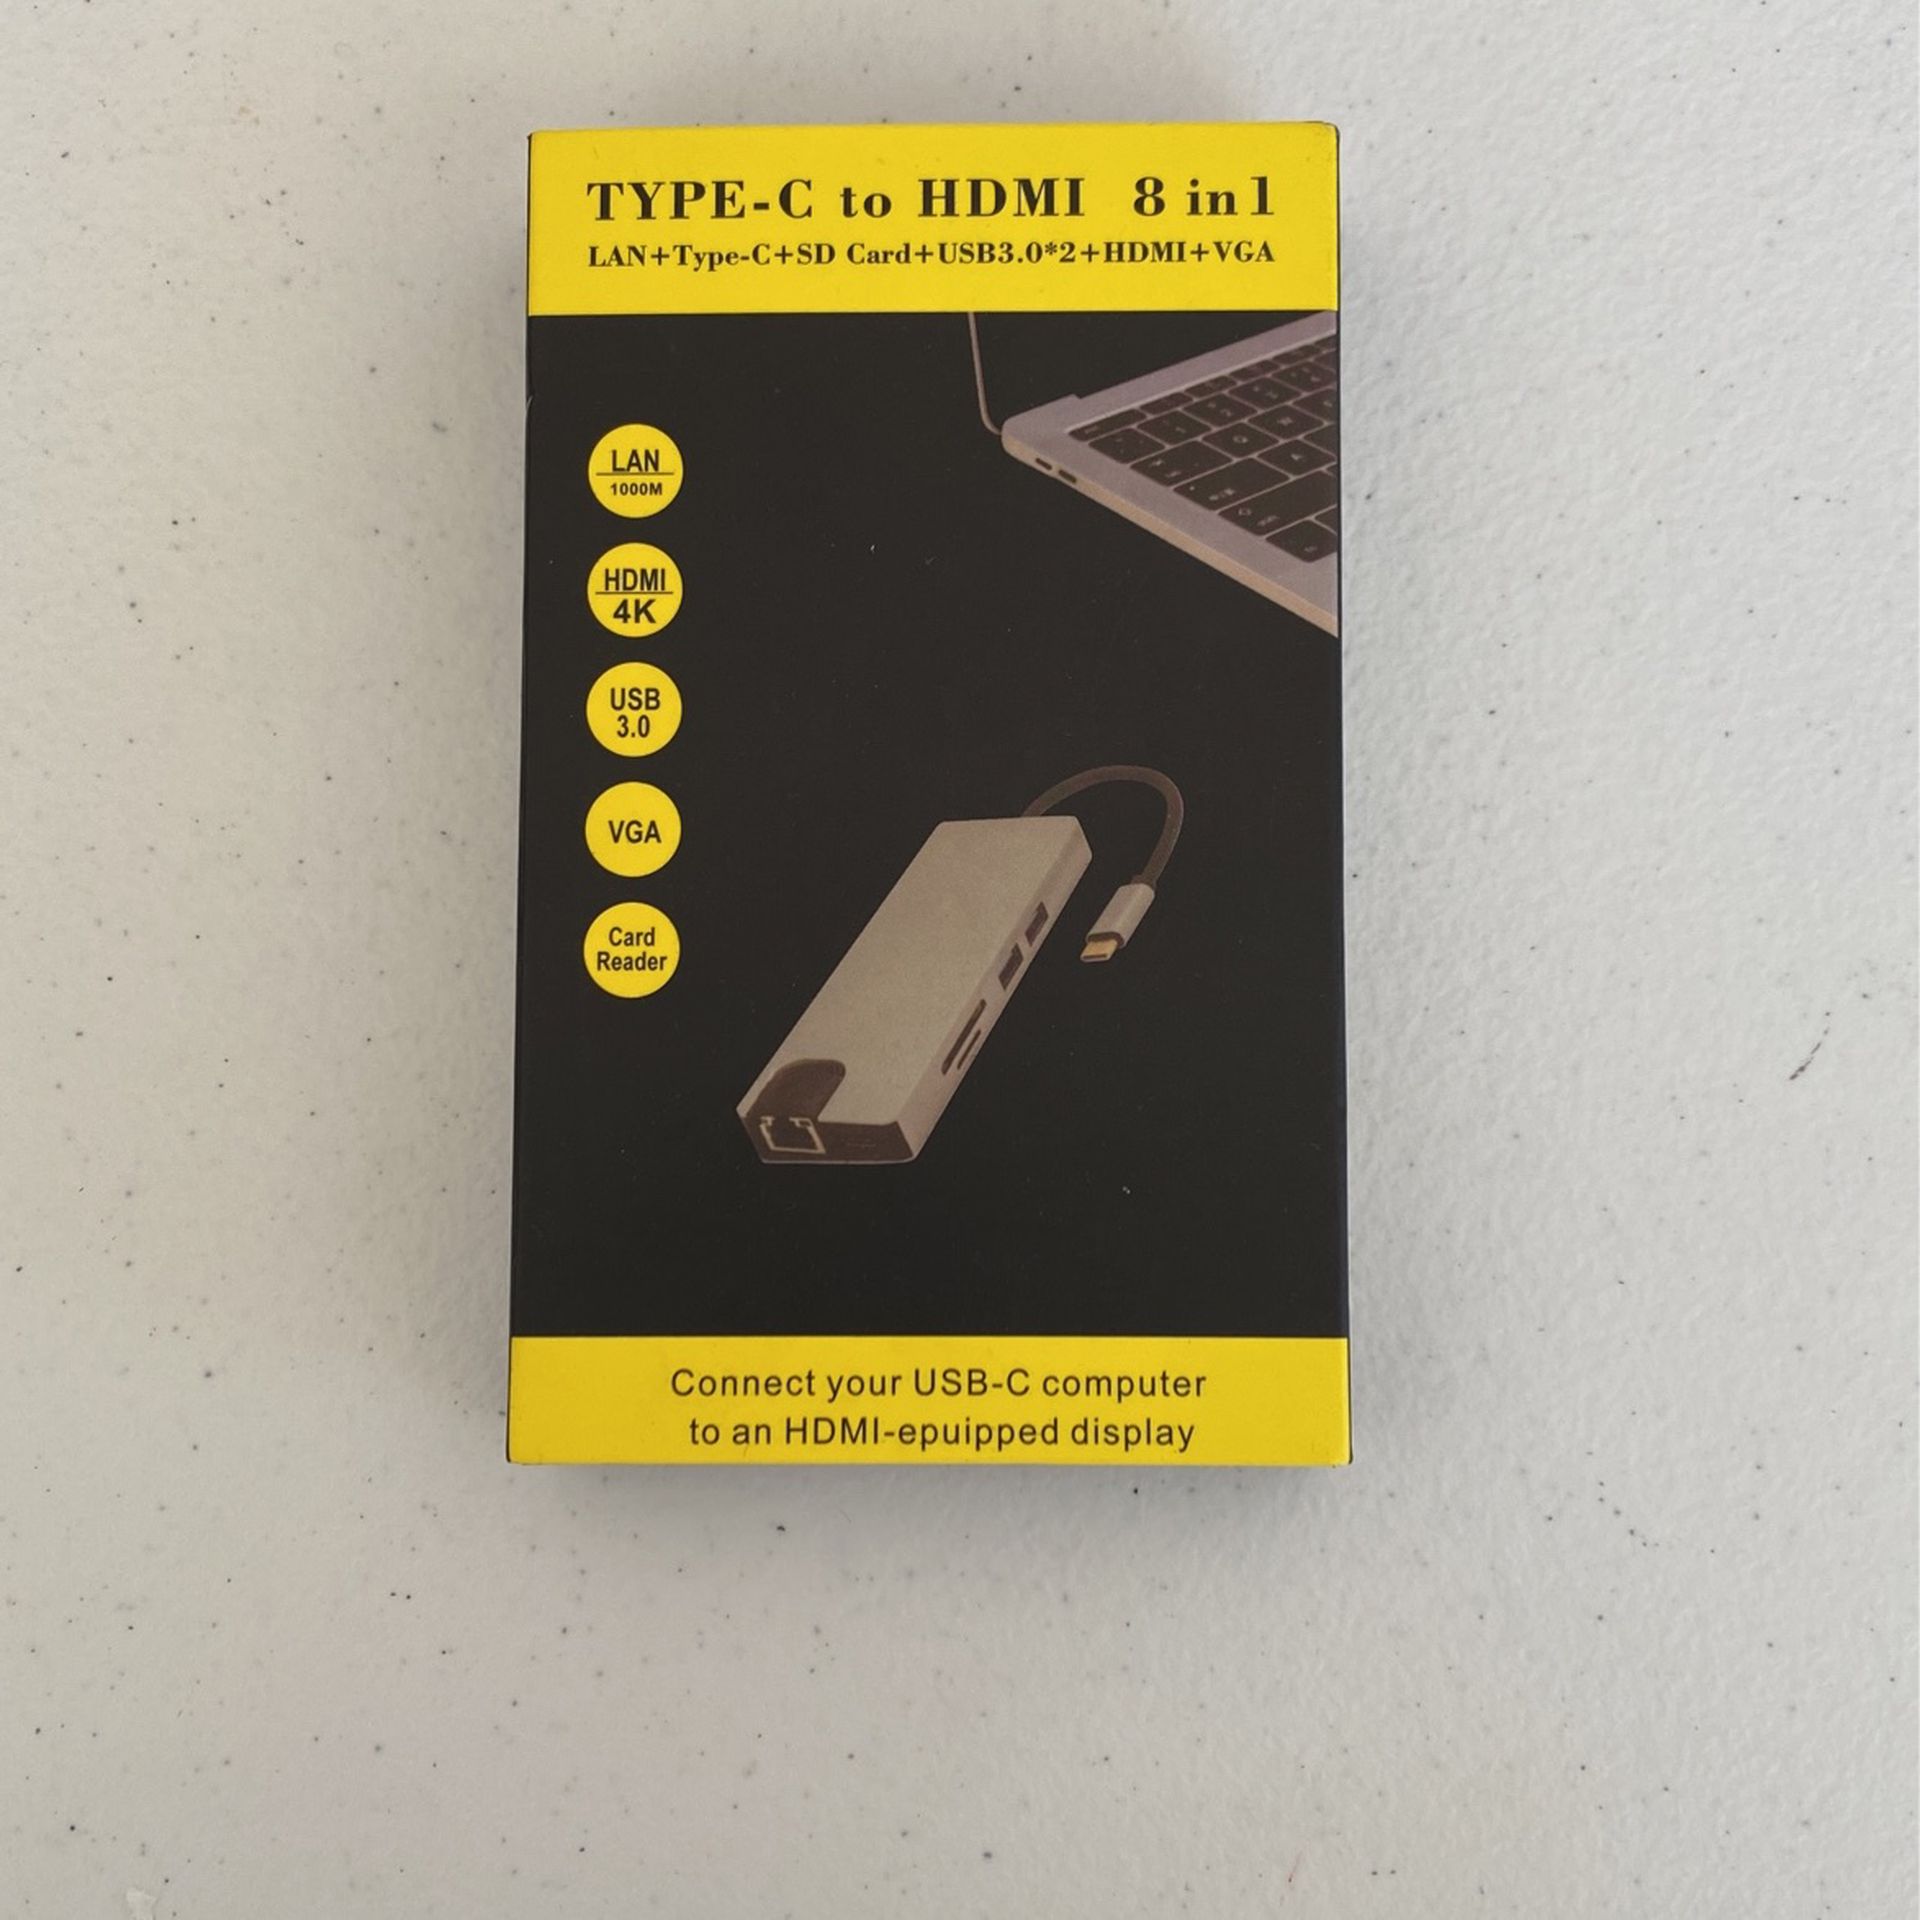 Type-C to HDMI 8 in 1